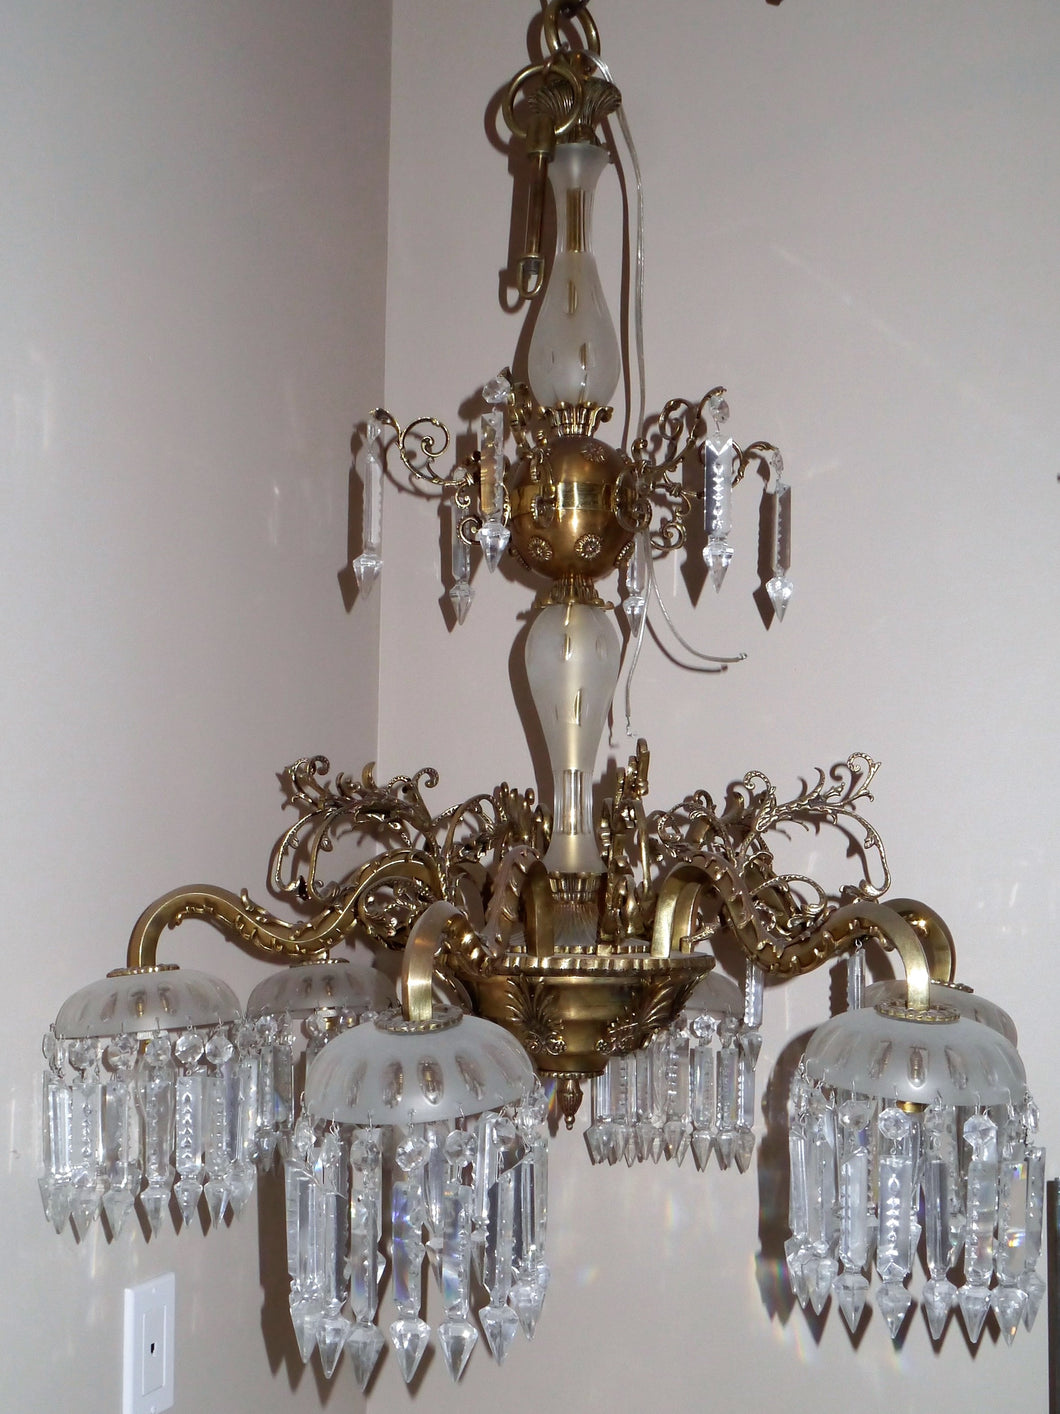 Antique French Neoclassical 6 arm Chandelier with Individual Canopied Chandeliers